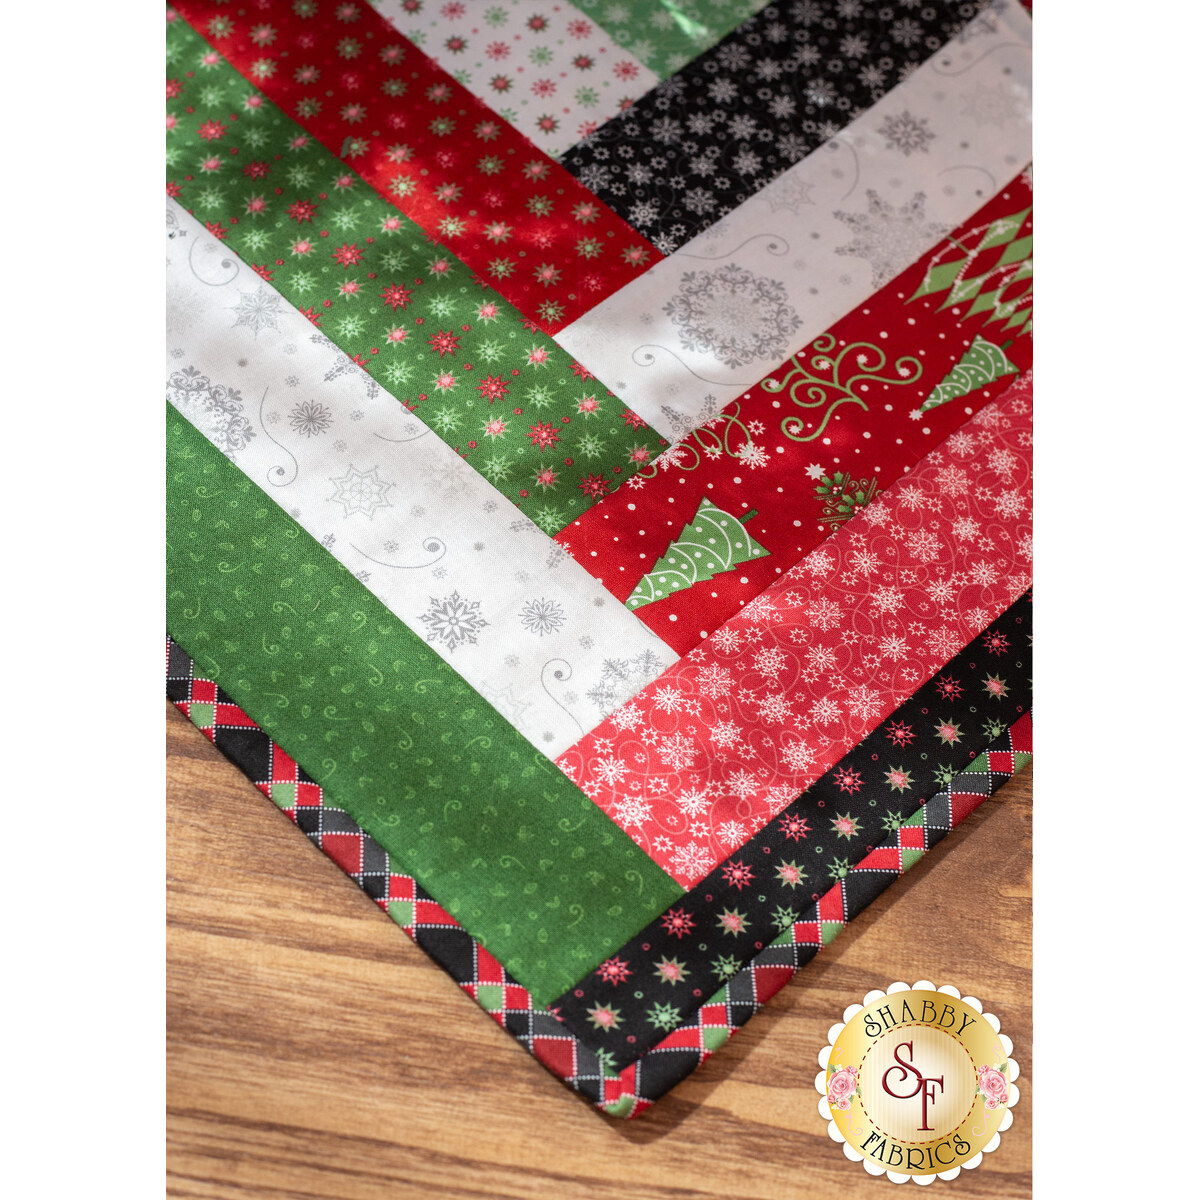 Quilt As You Go Christmas Tree Skirt Batting + Pattern Kit – Heavenly  Fabric Shop